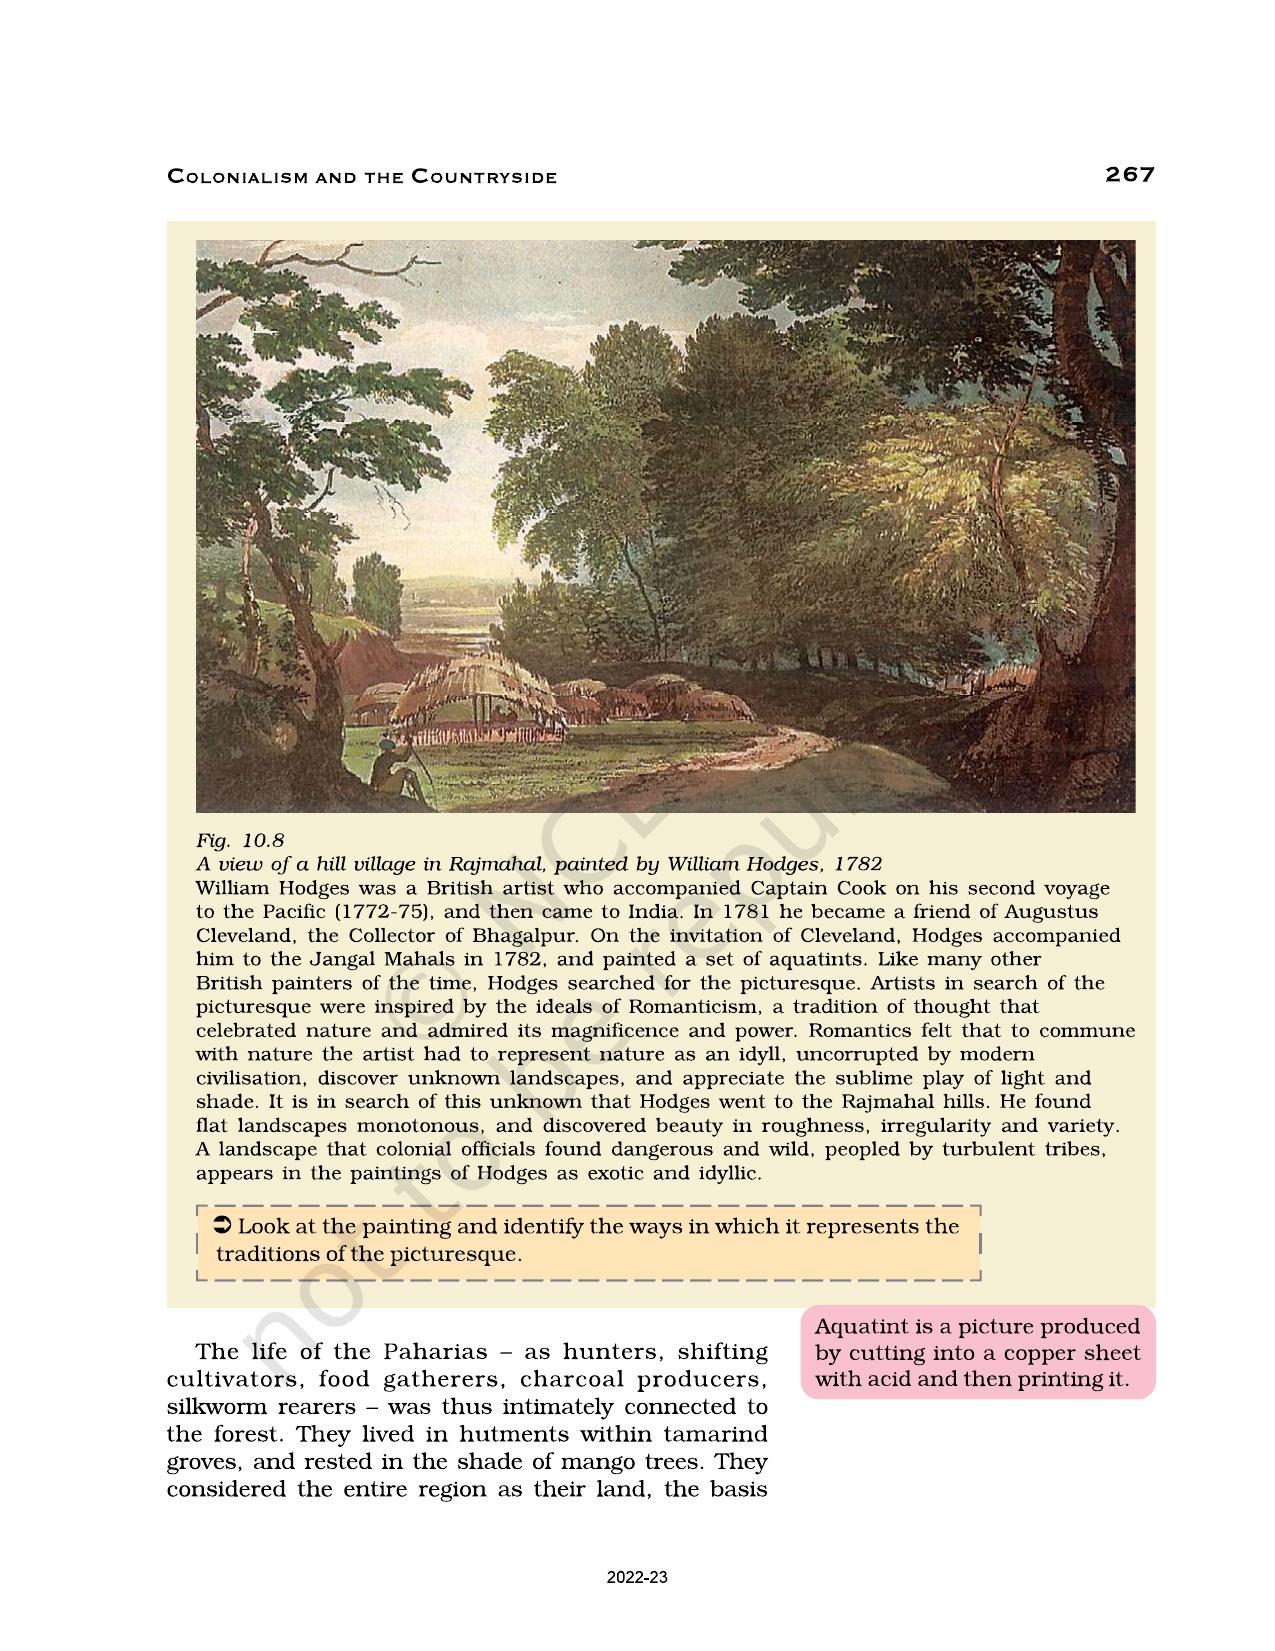 NCERT Book for Class 12 History (Part-II) Chapter 10 Colonialism and the Countryside - Page 11